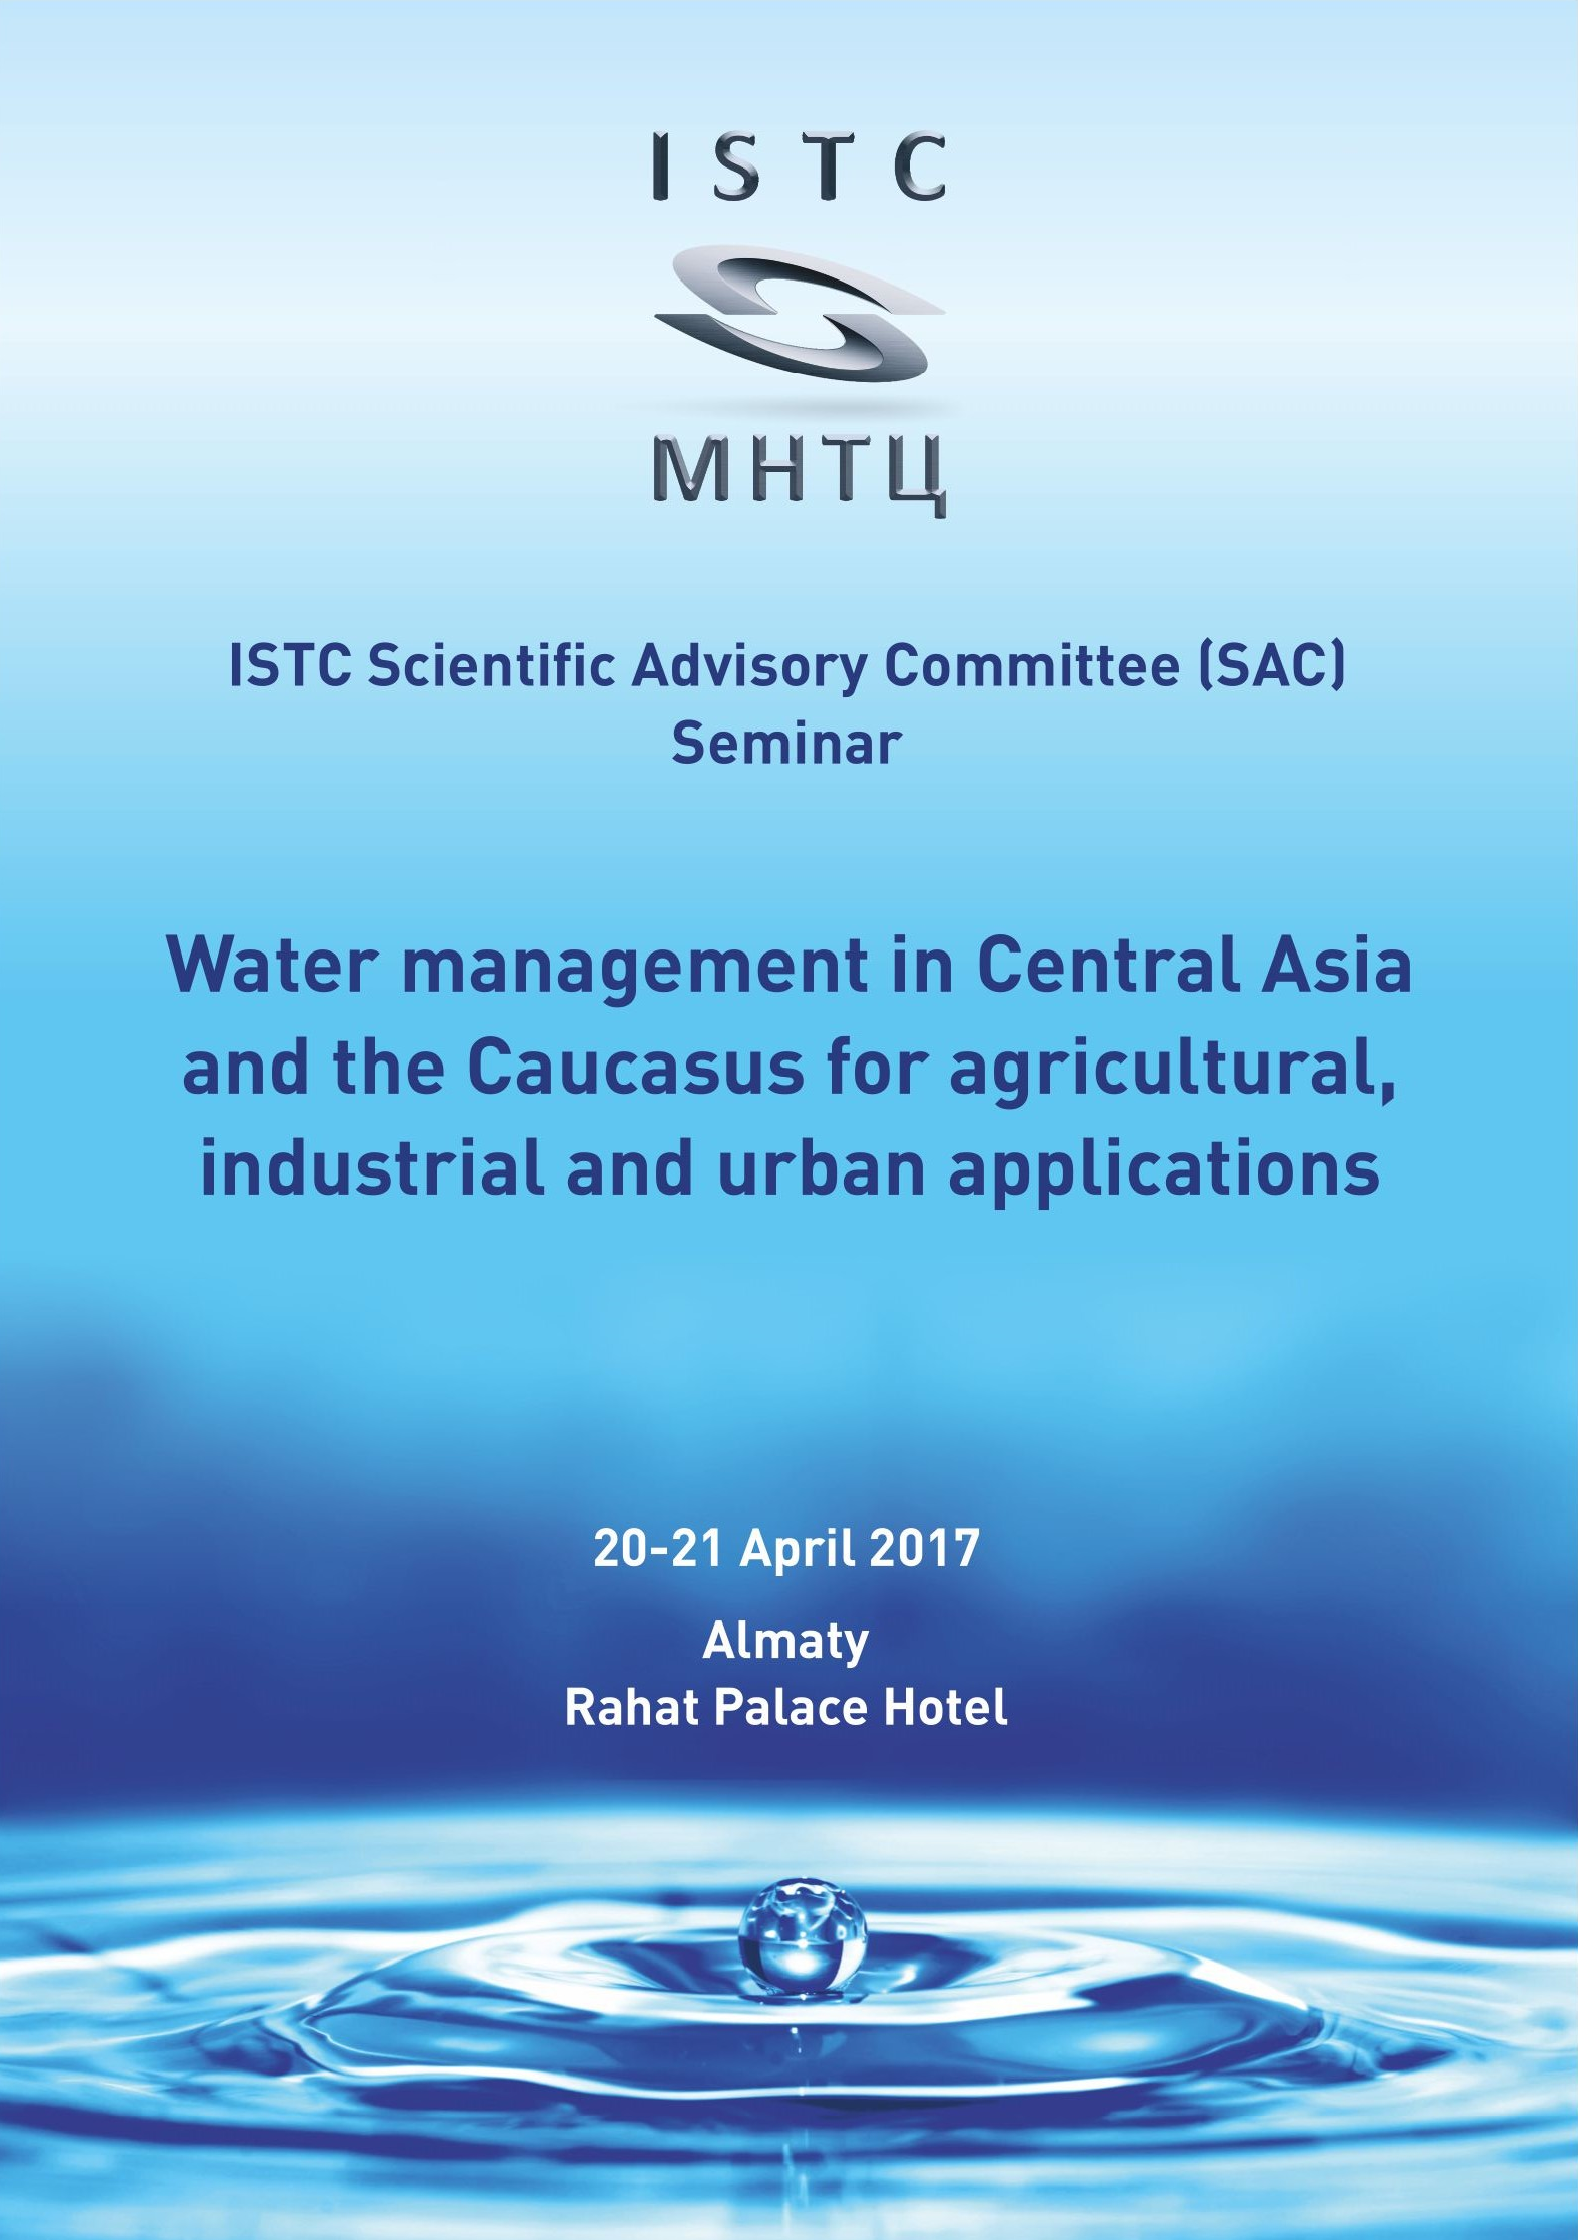 Seminar on Water Management in Central Asia and the Caucasus for agriculture, industrial and urban application